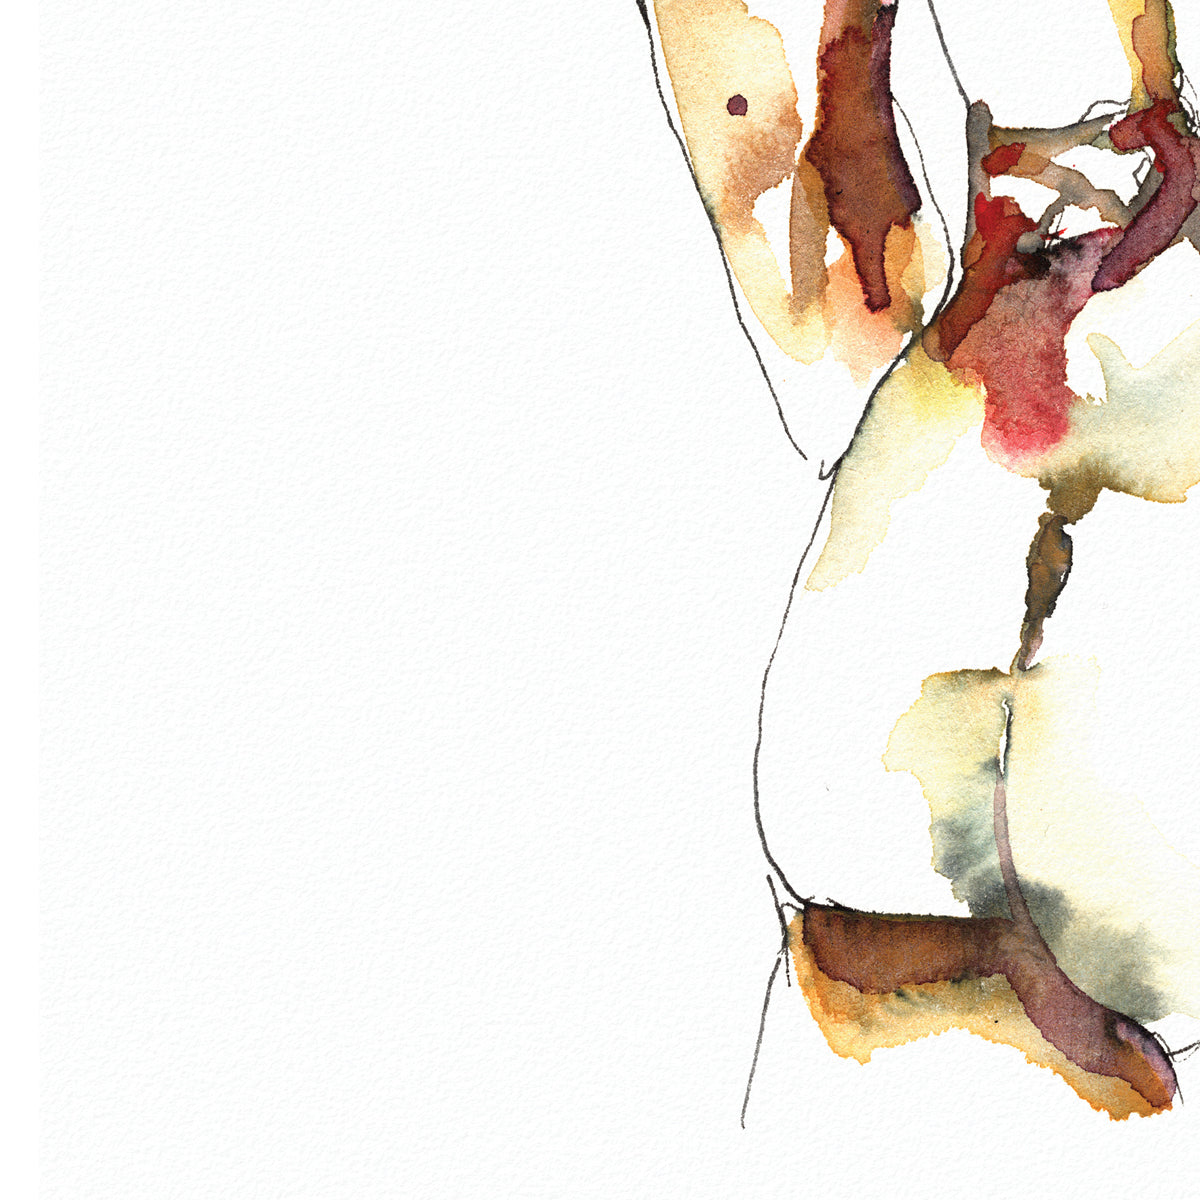 Muscular Male Back View, Strong Arm Pose, Ink & Watercolor - Giclee Art Print